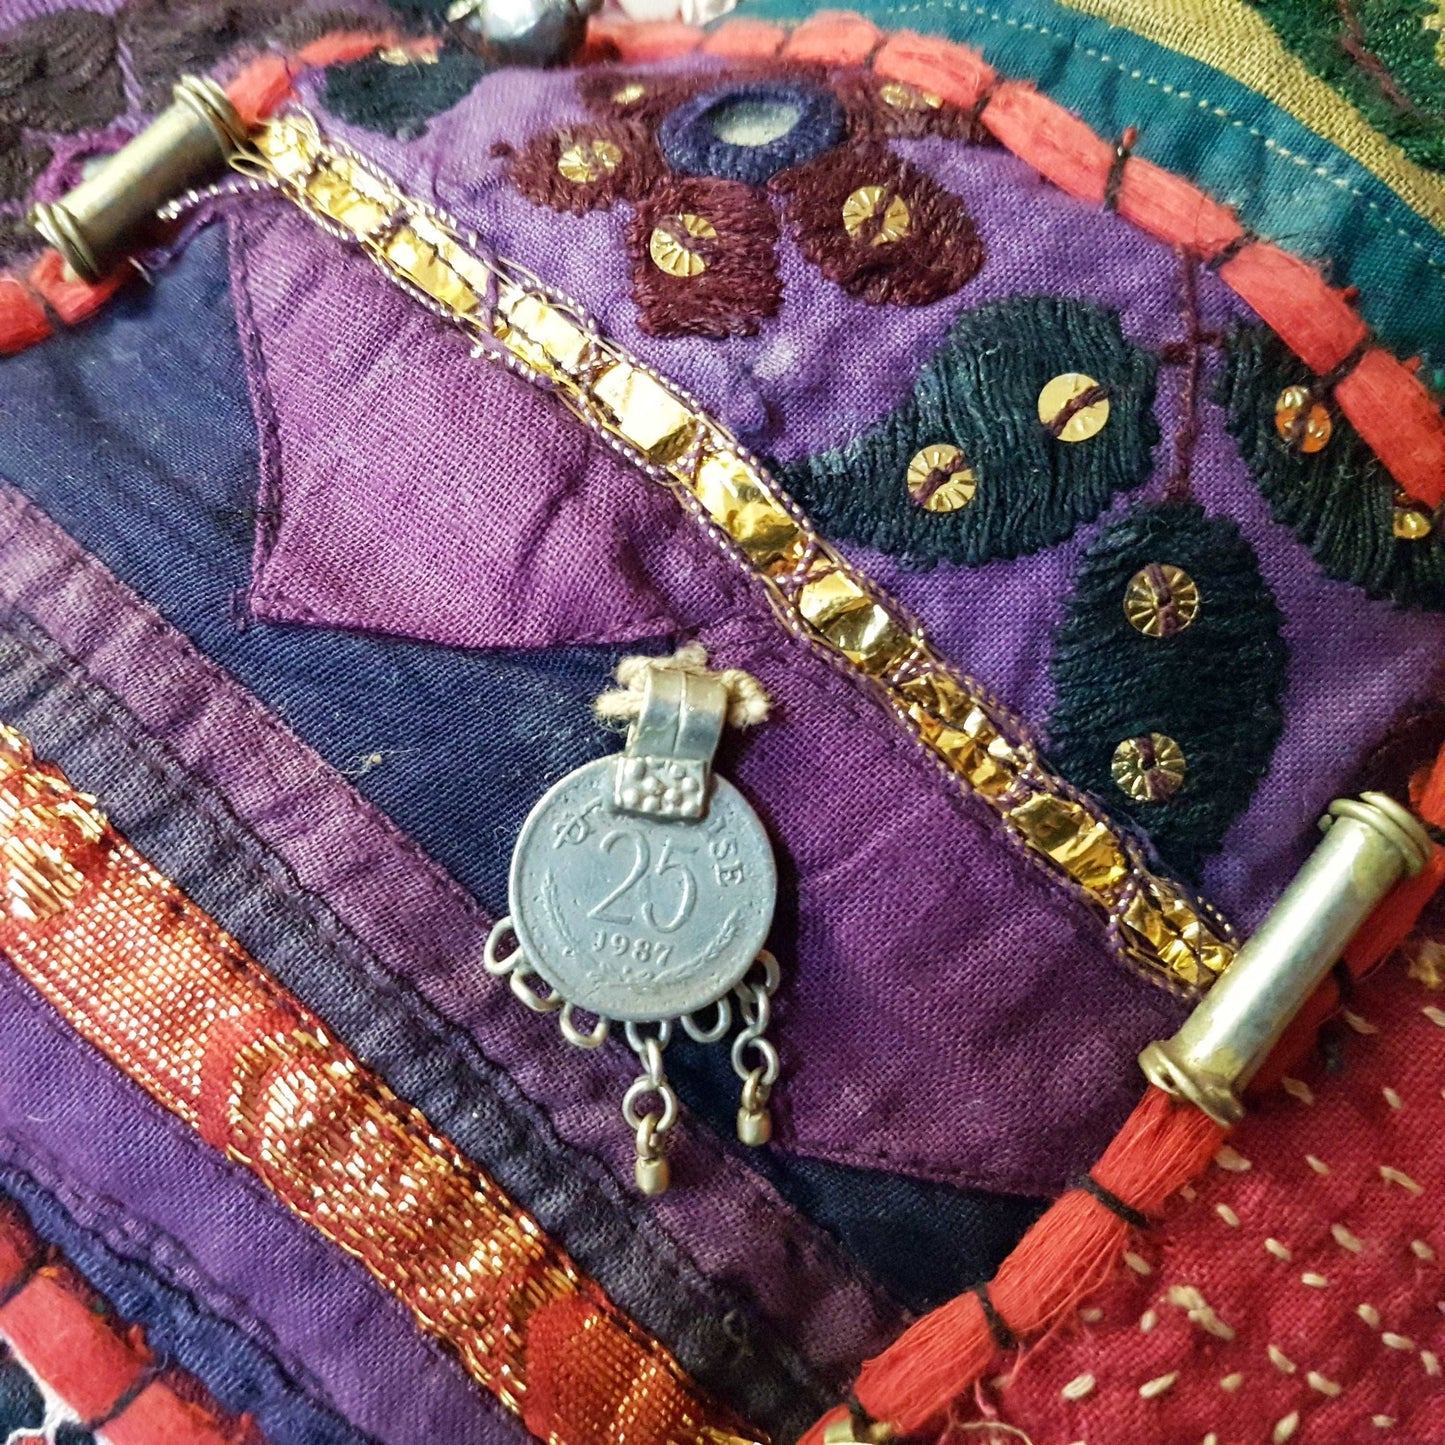 Banjara shoulder bag. Authentic vintage tribal gypsy tote with silver bead ornaments & embroidered mirror work. One of a kind. Rare find. - Vintage India Ca